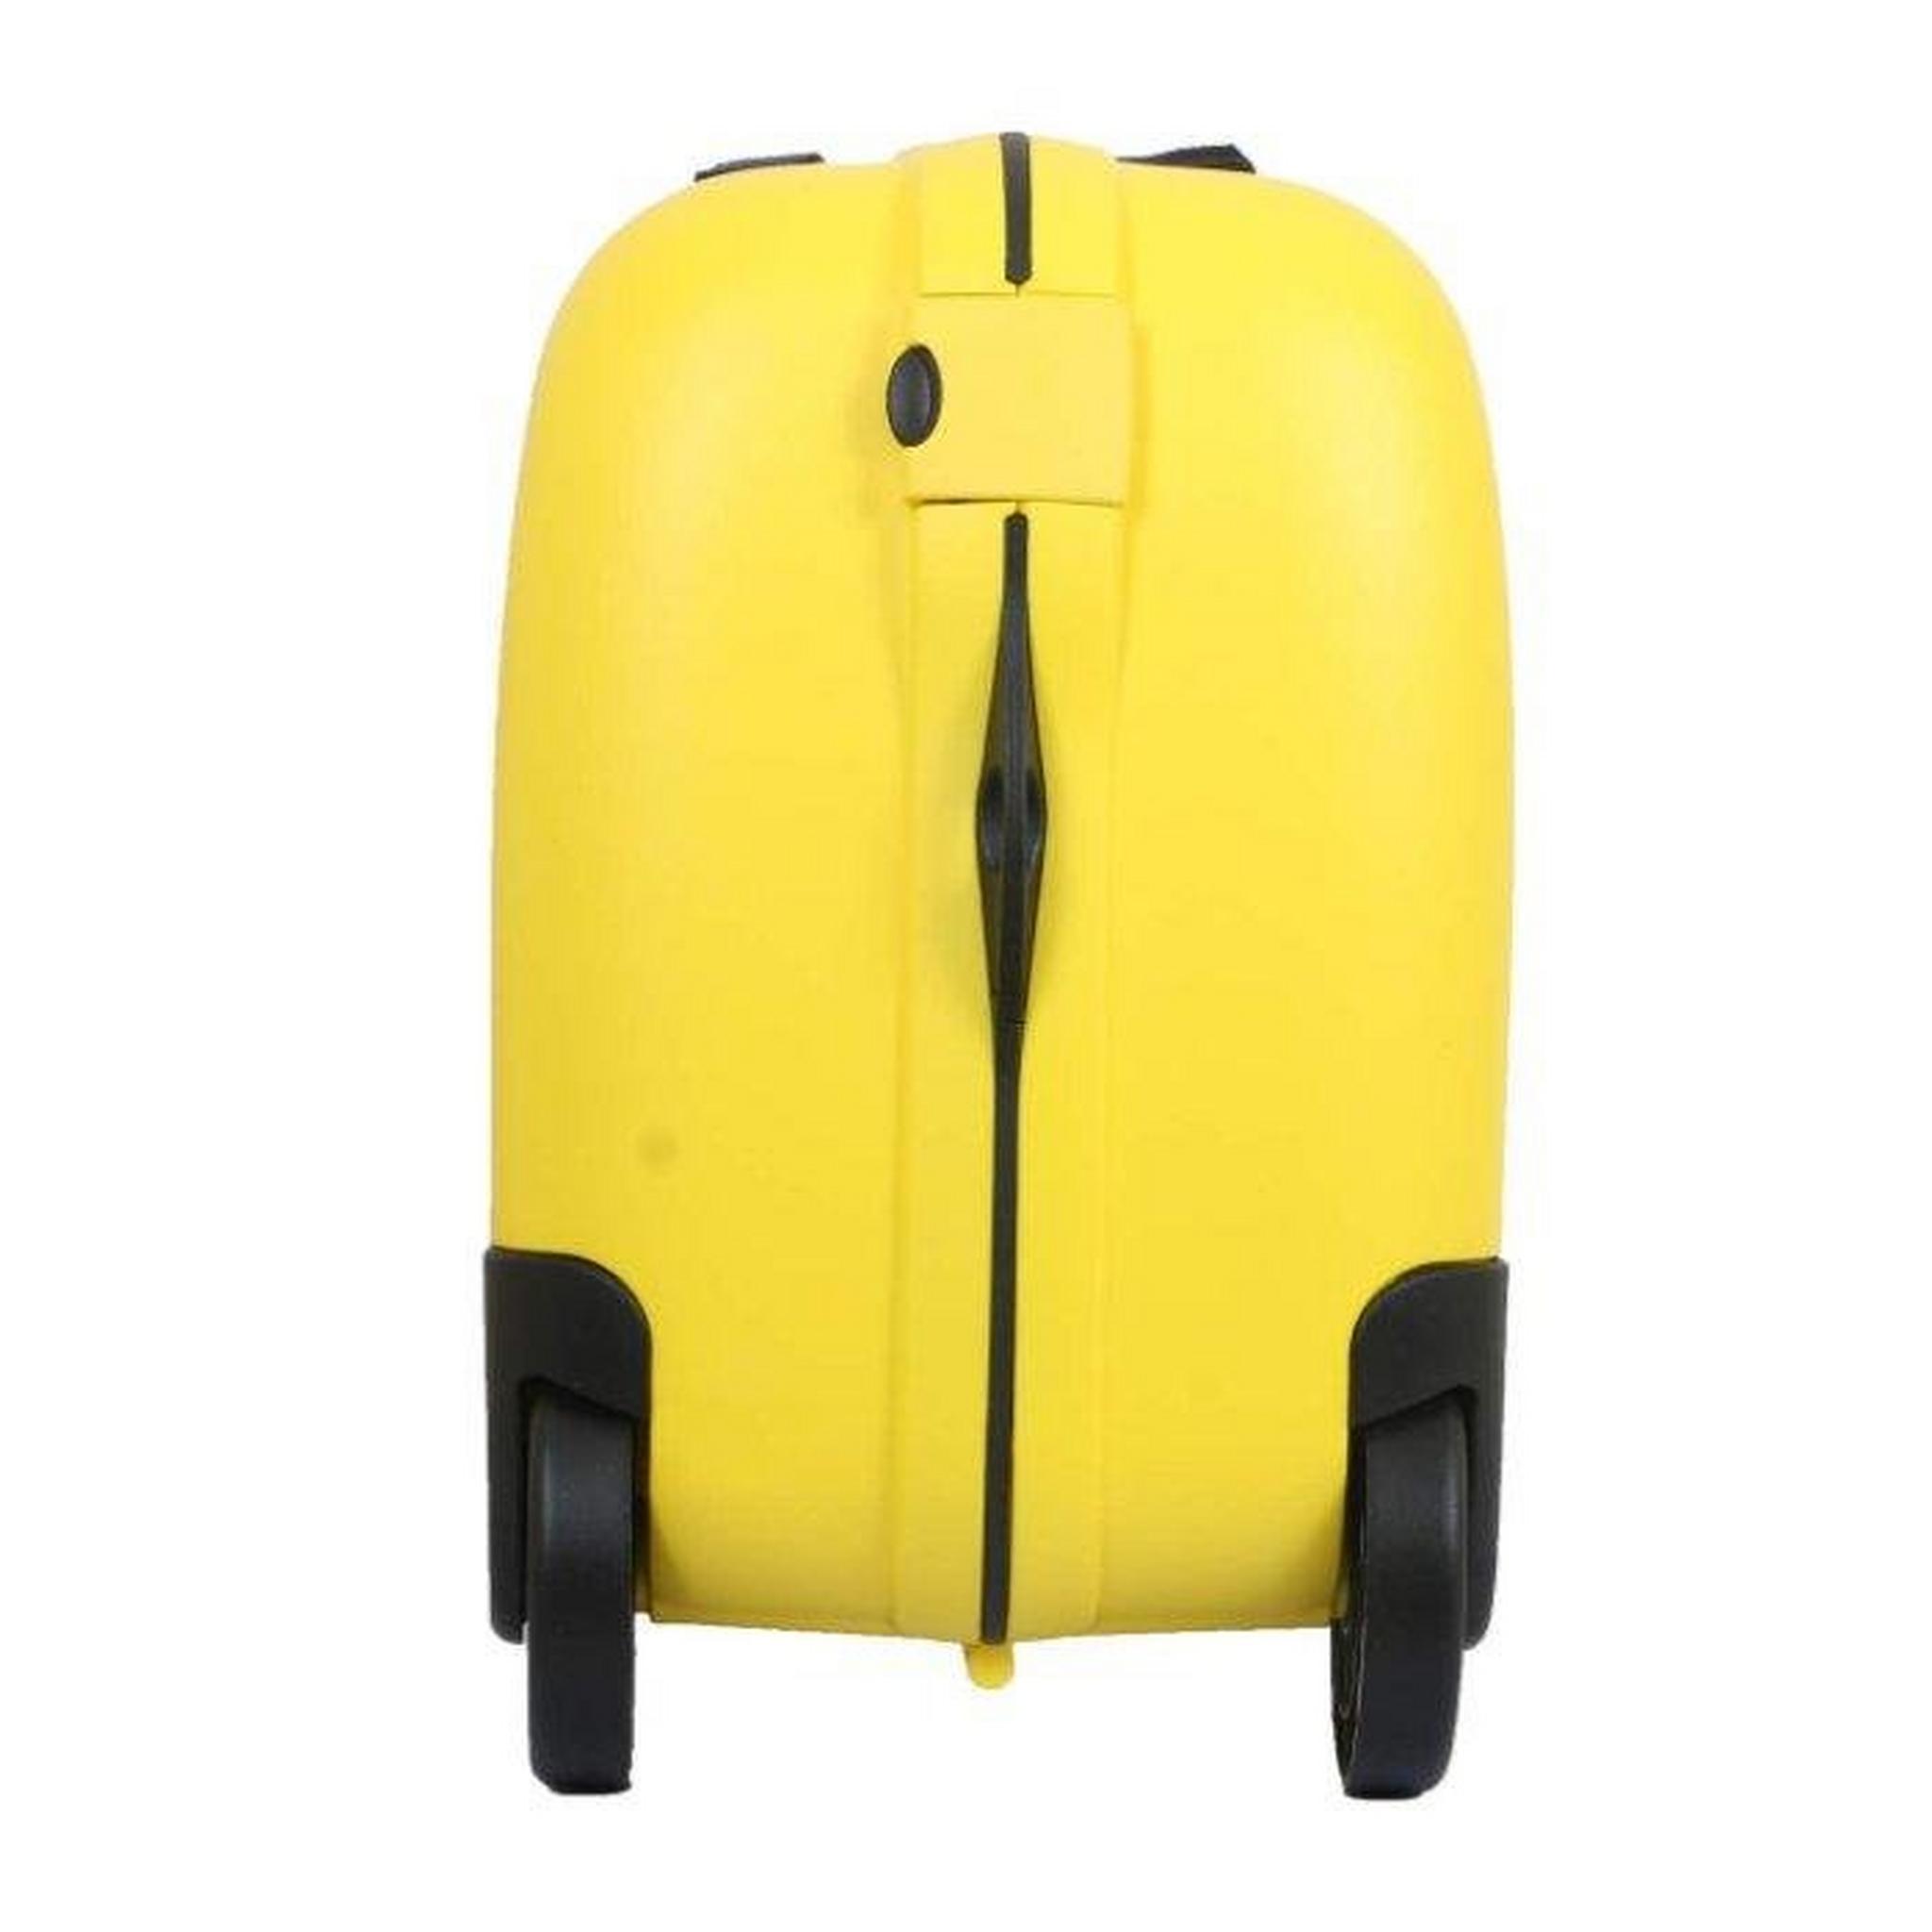 American Tourister Skittle Kids Trolley, 25 Liters, FH0X06411 – Yellow Bee Pattern